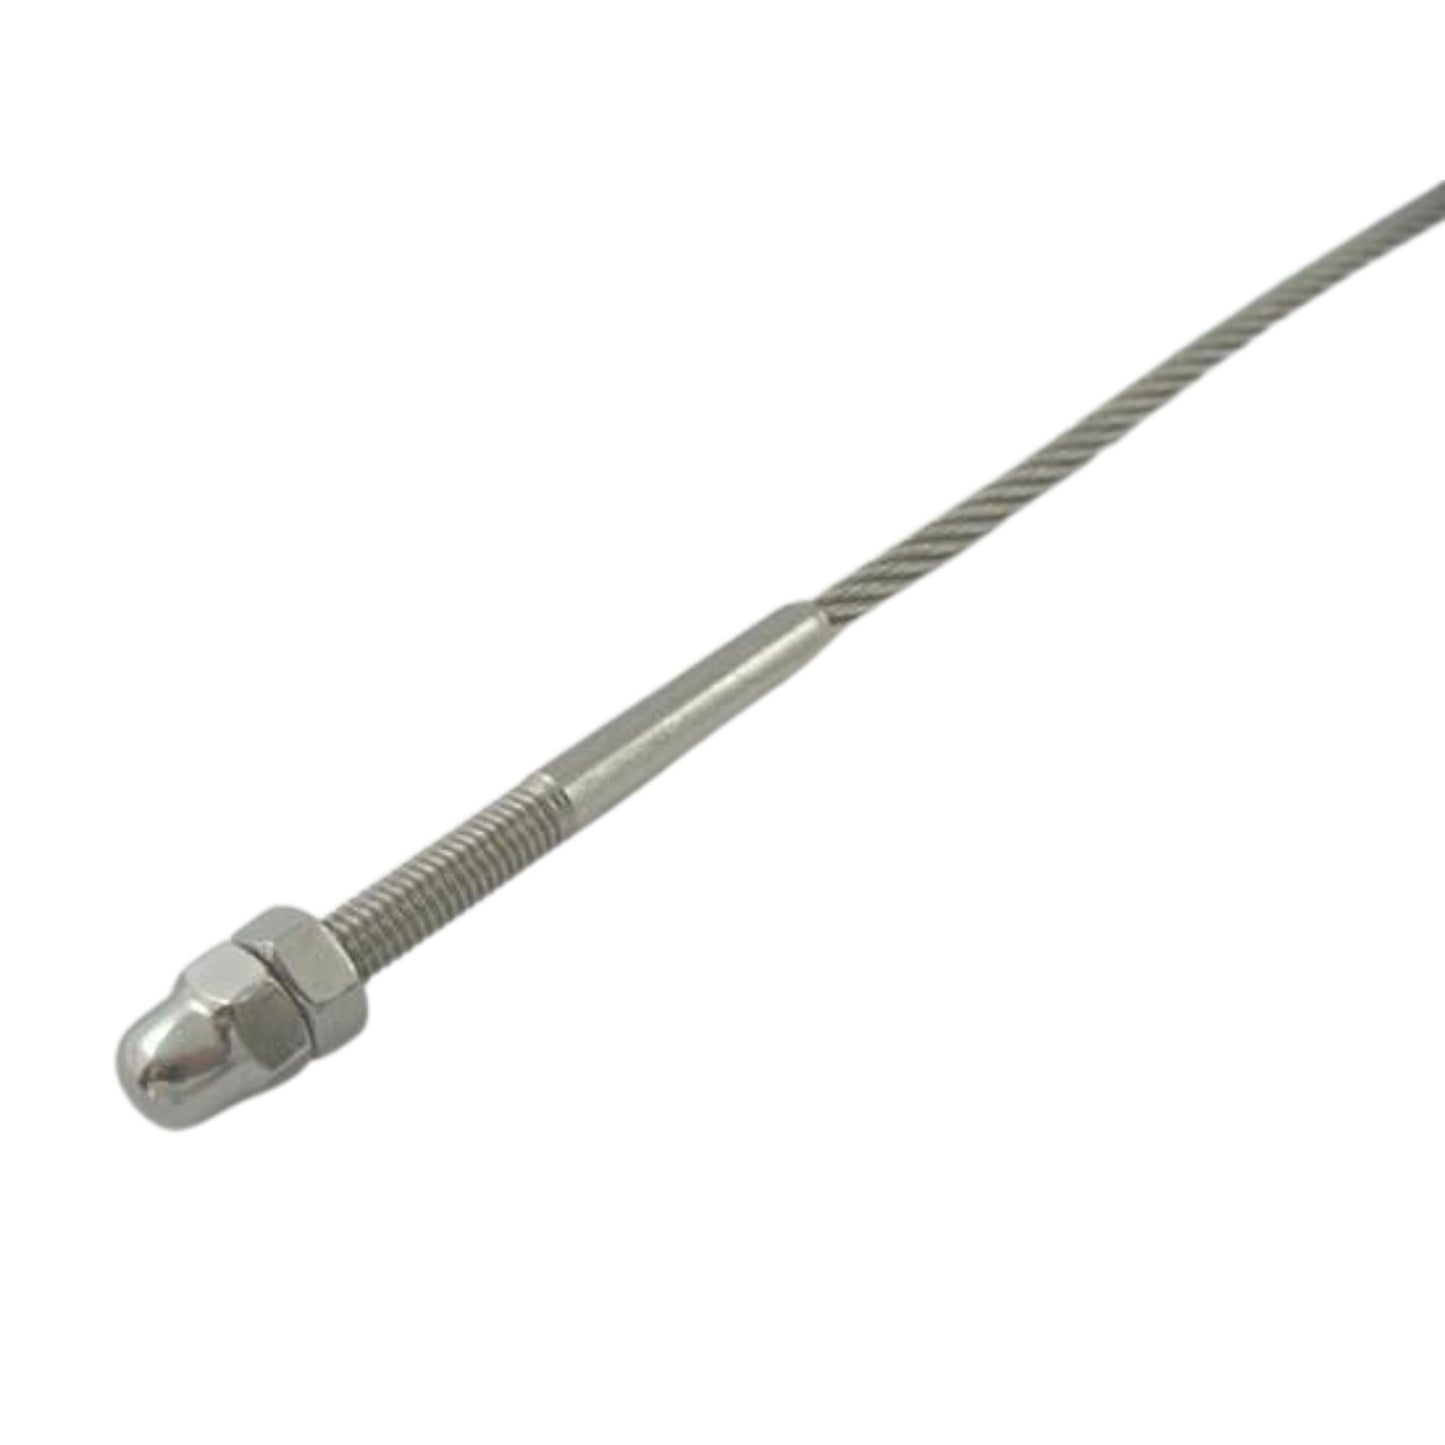 Slimline Swage Stud for 3 mm Cable